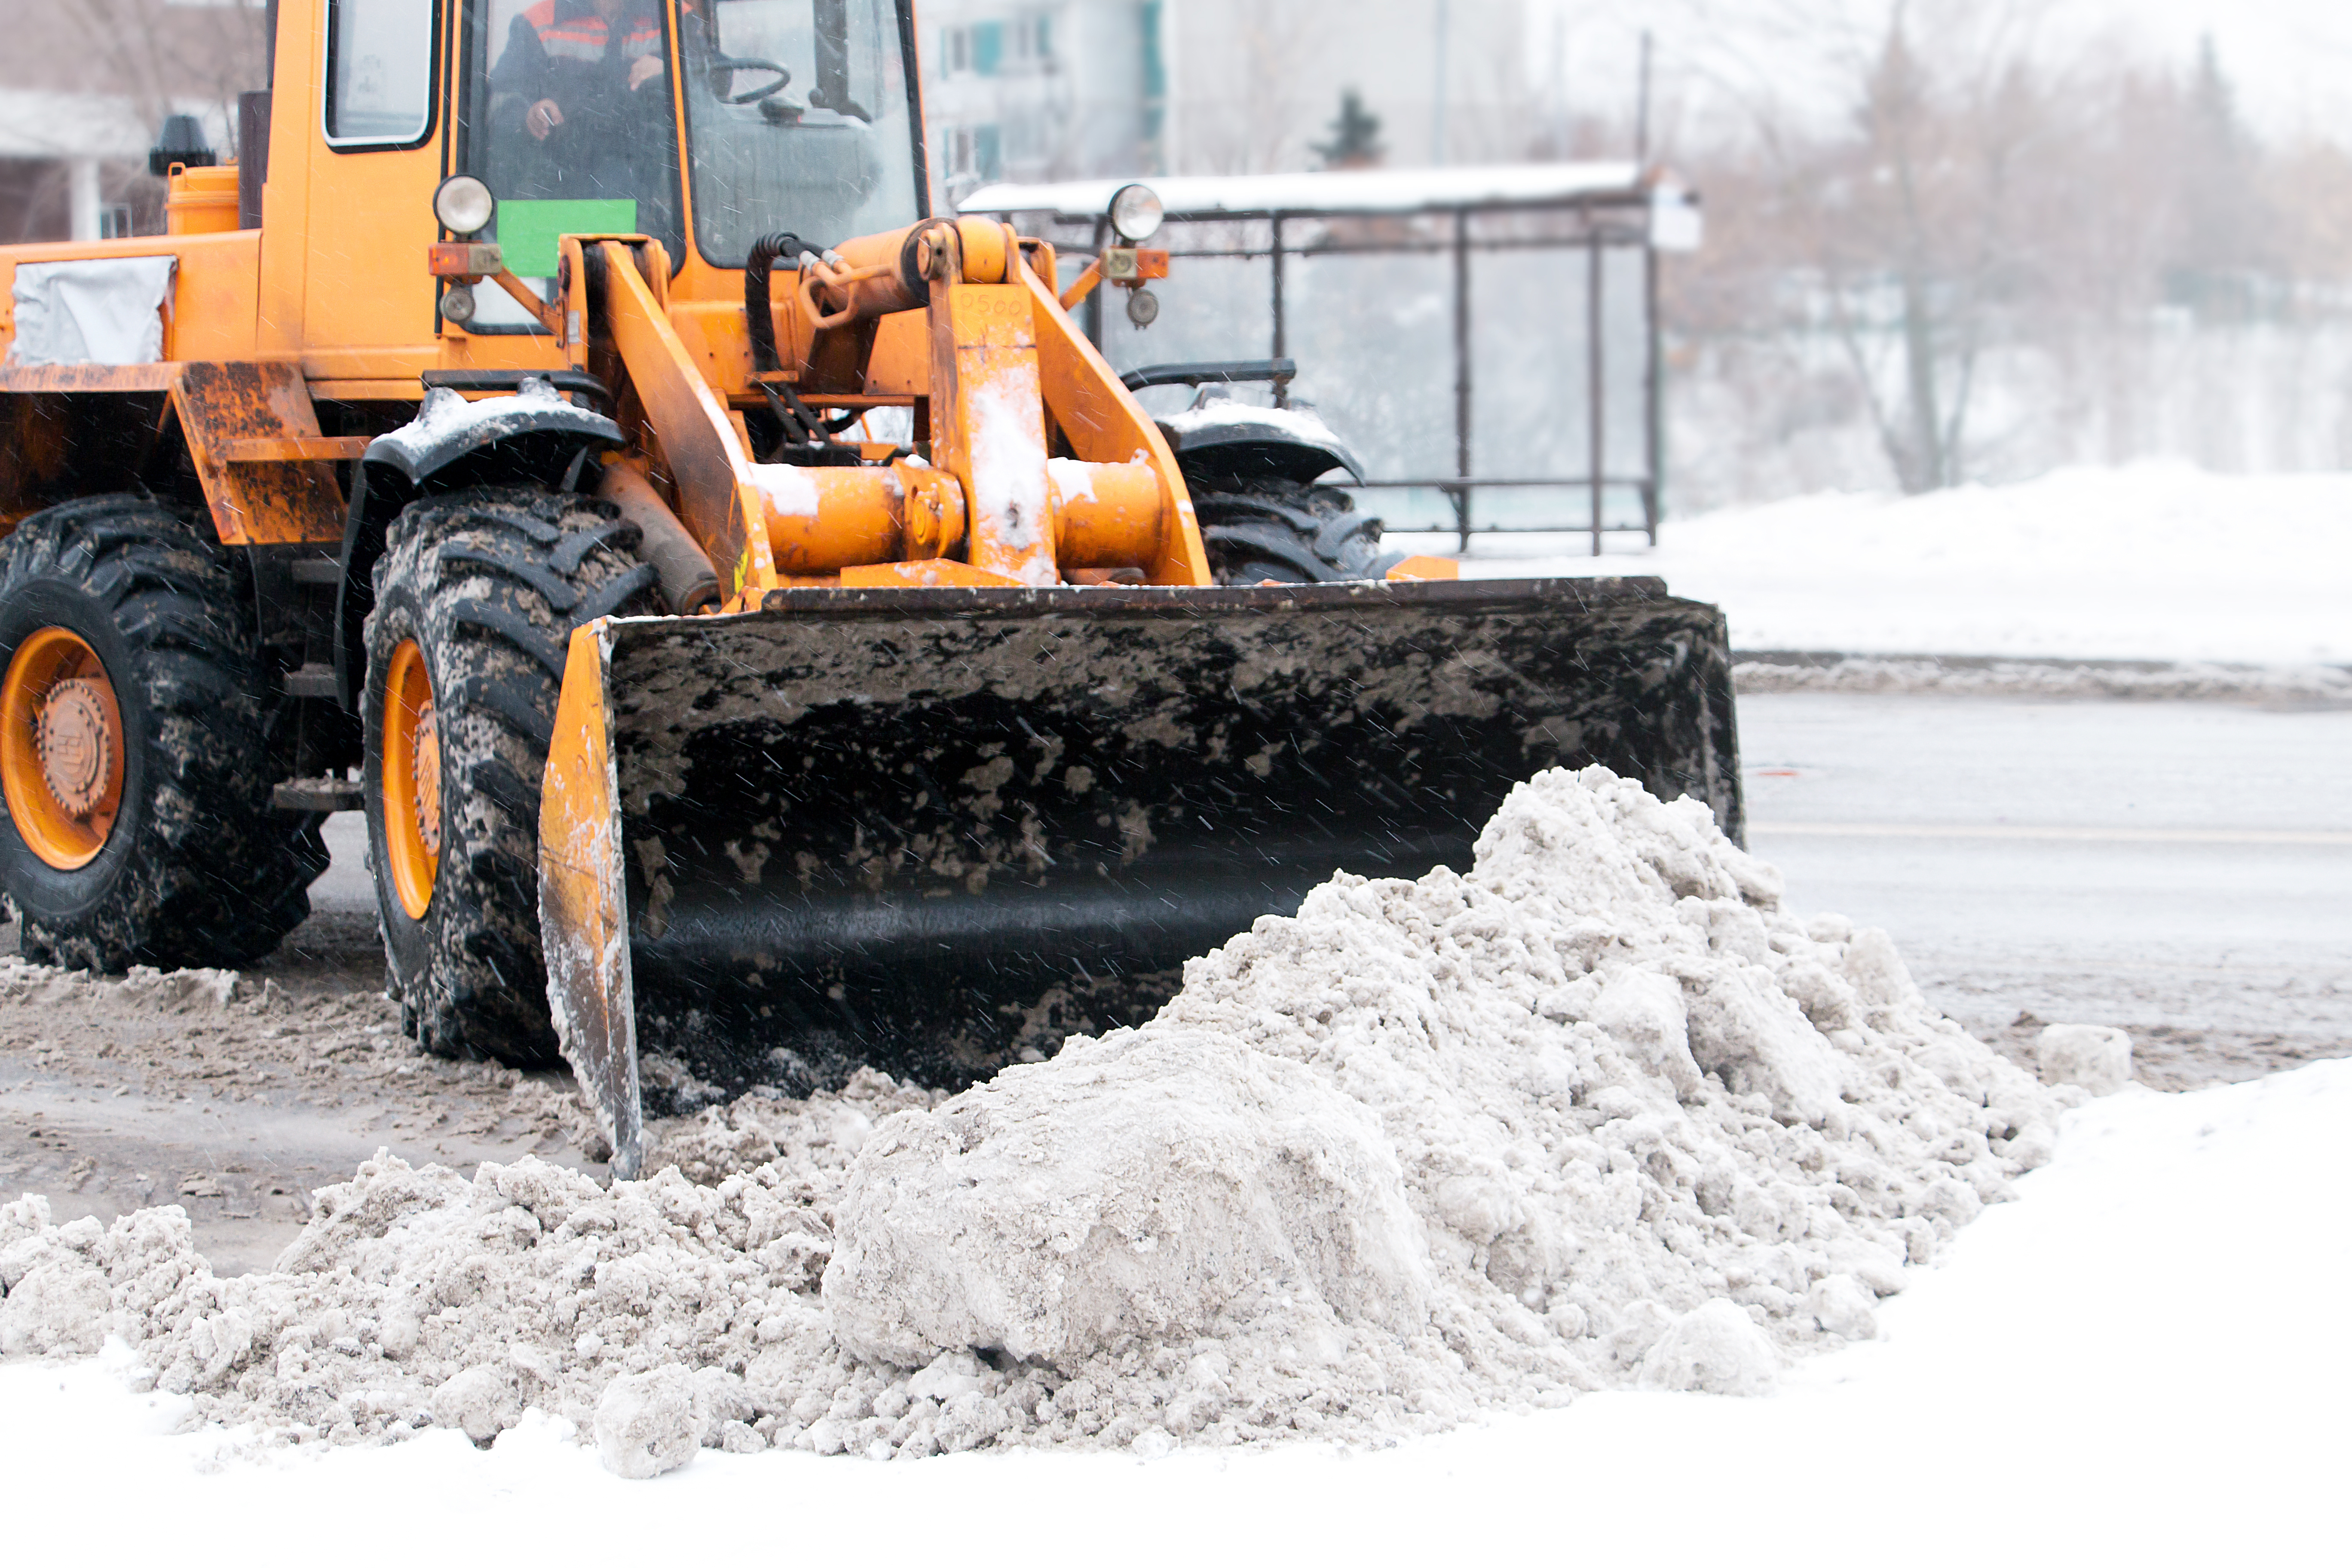 Snow Removal Service - For more information or to request a free estimate, visit their website at https://myclaritycommercial.com/ or give us a call at (952) 370-224-2699. Affiliations & Credentials: We are proud members of IREM, CCIM and MNCAR along with various professional organizations and hold relevant certifications in the real estate management field. Our affiliations and credentials demonstrate our commitment to excellence and our ongoing efforts to stay up-to-date with industry best practices. Commercial properties